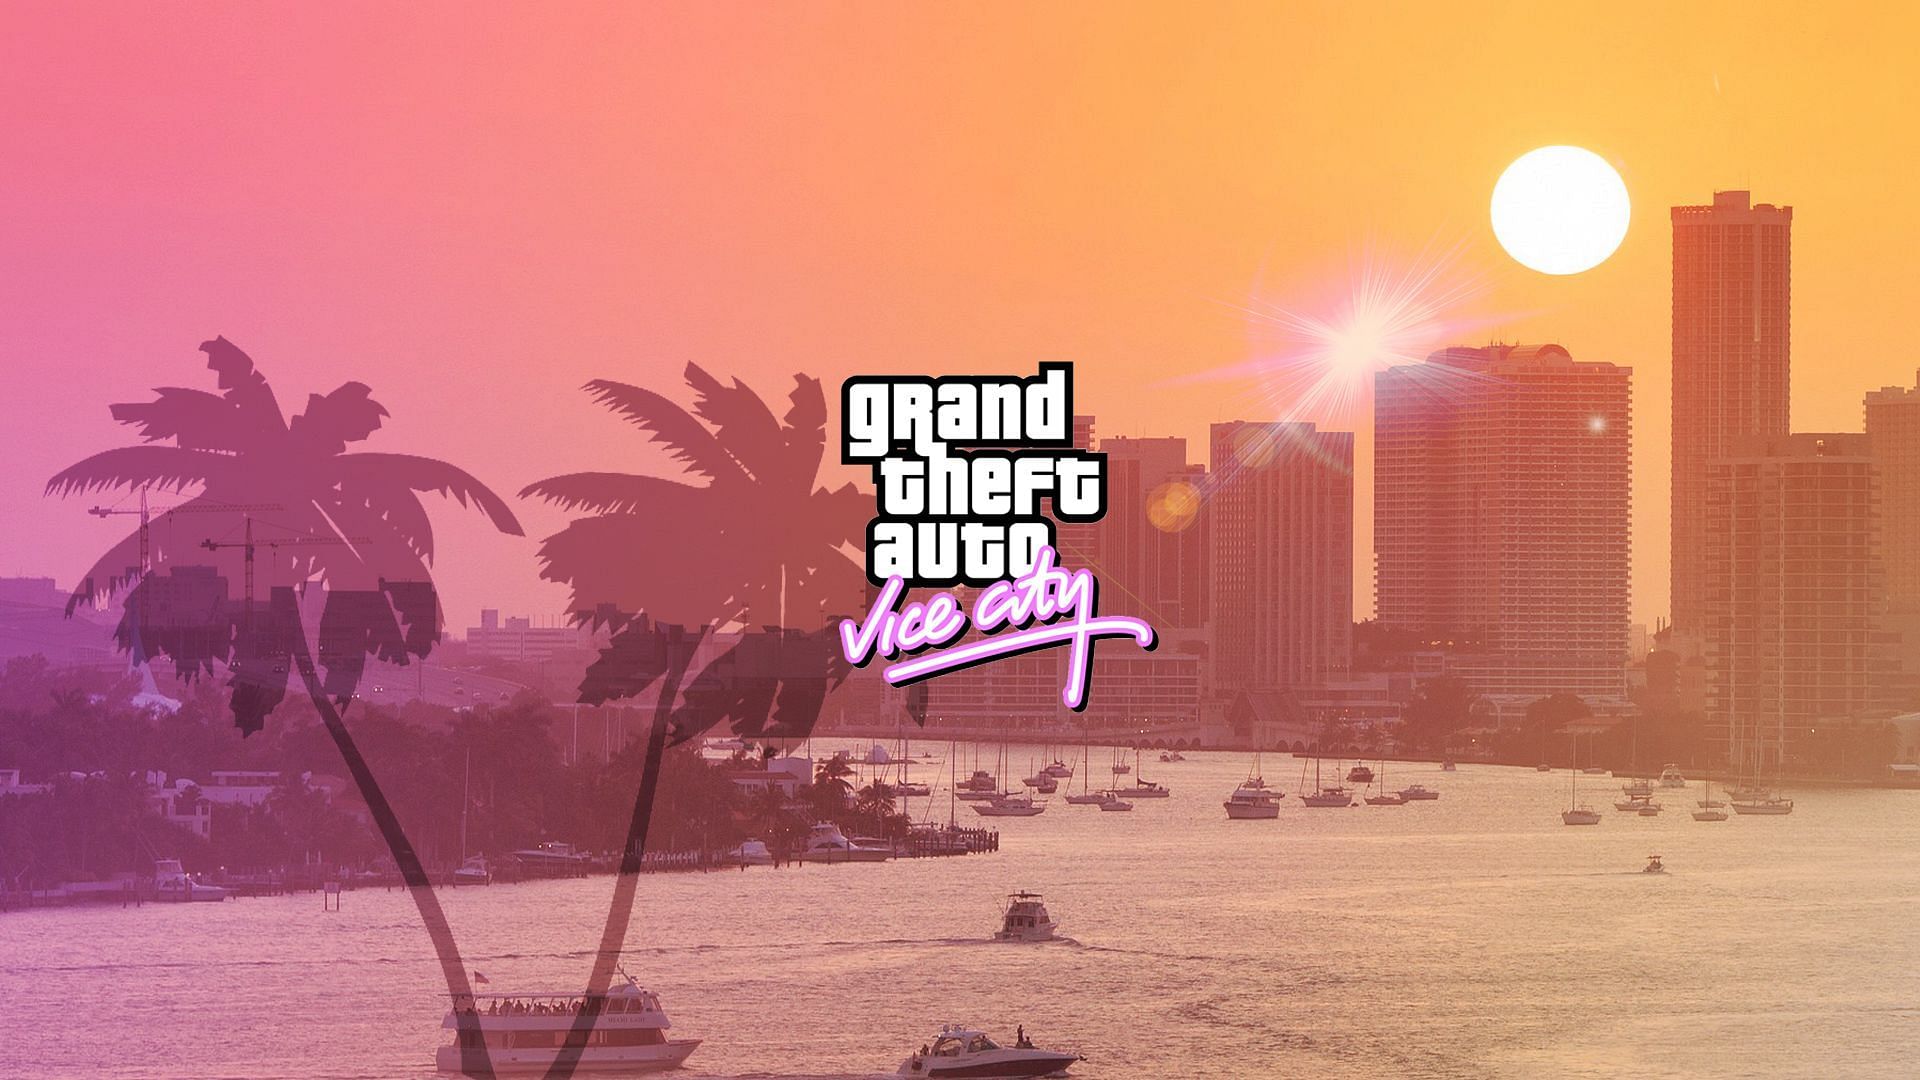 GTA Vice City was released in 2002 (Image via wallpaperaccess.com)